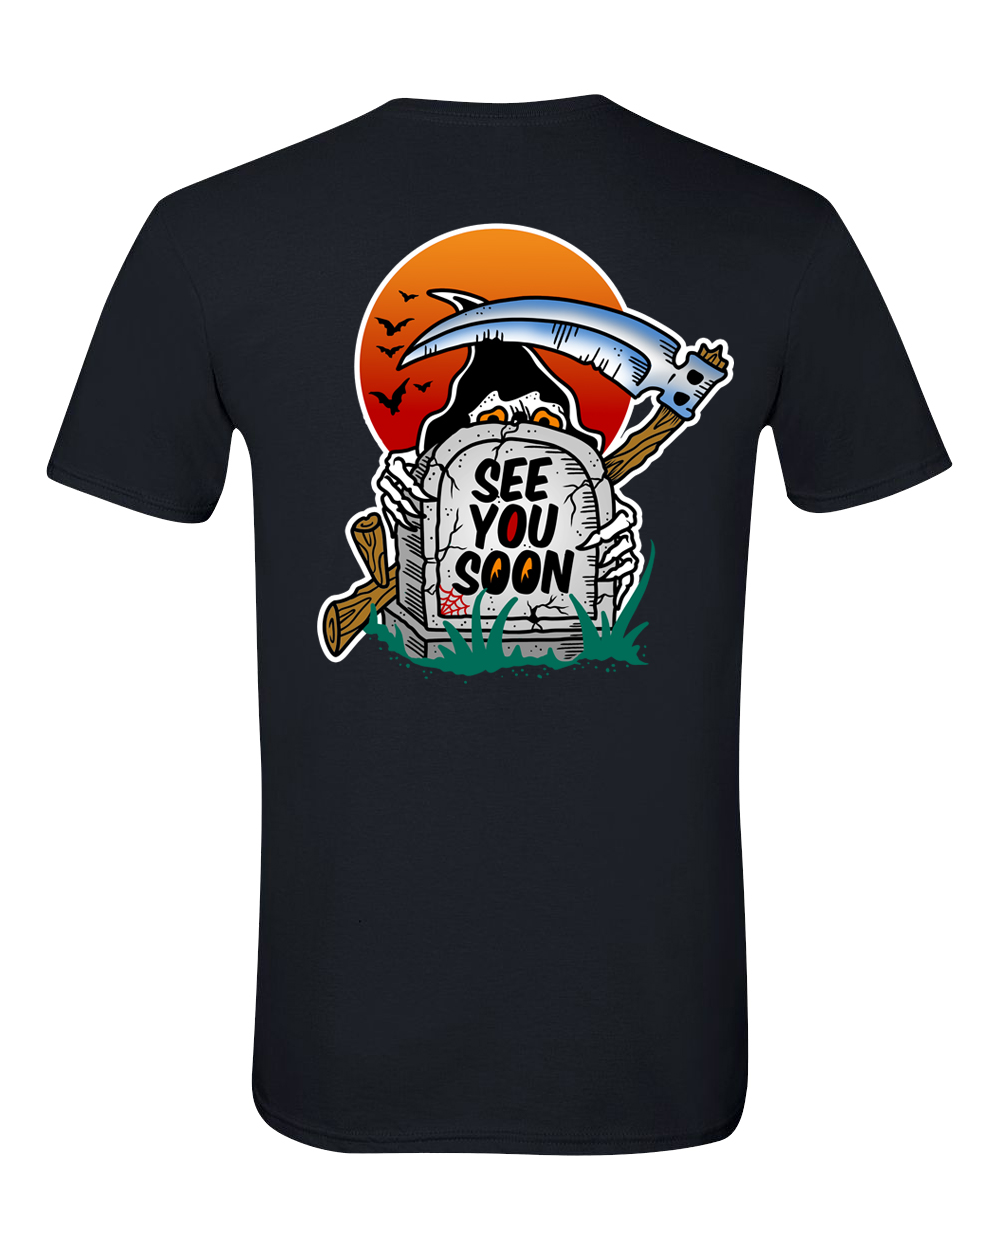 Marcus Dove “See you soon” unisex t-shirt